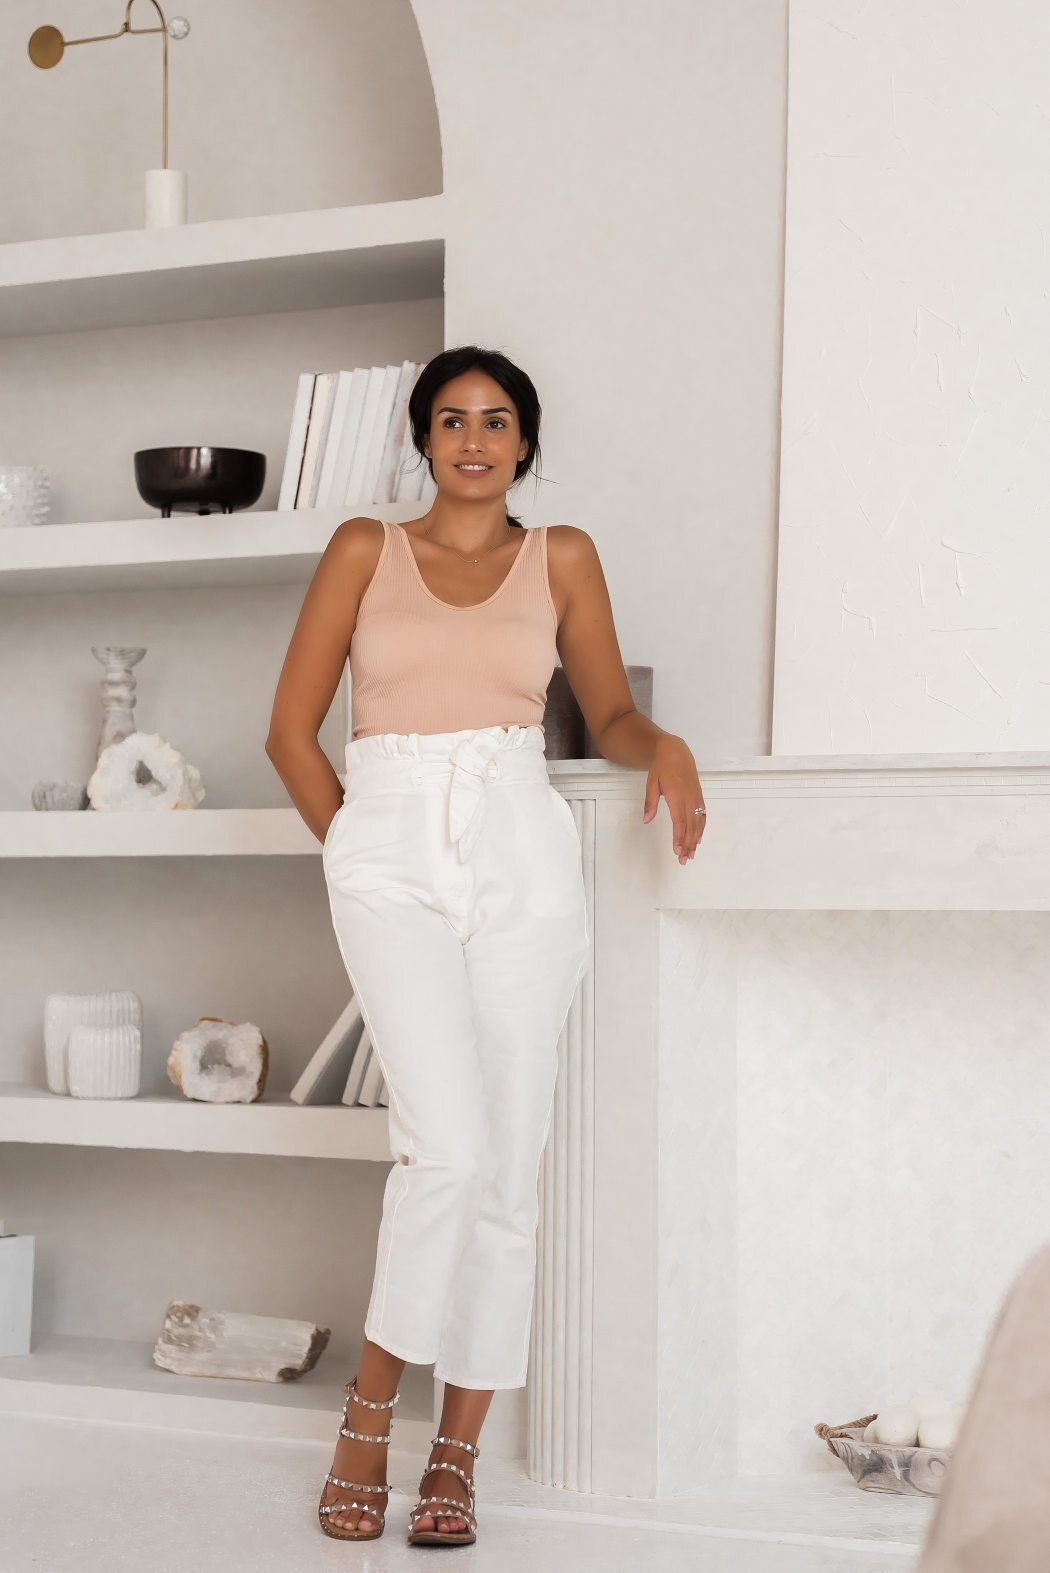 Branding photo of social media influencer Chantel wearing a beige top posing in white themed living room